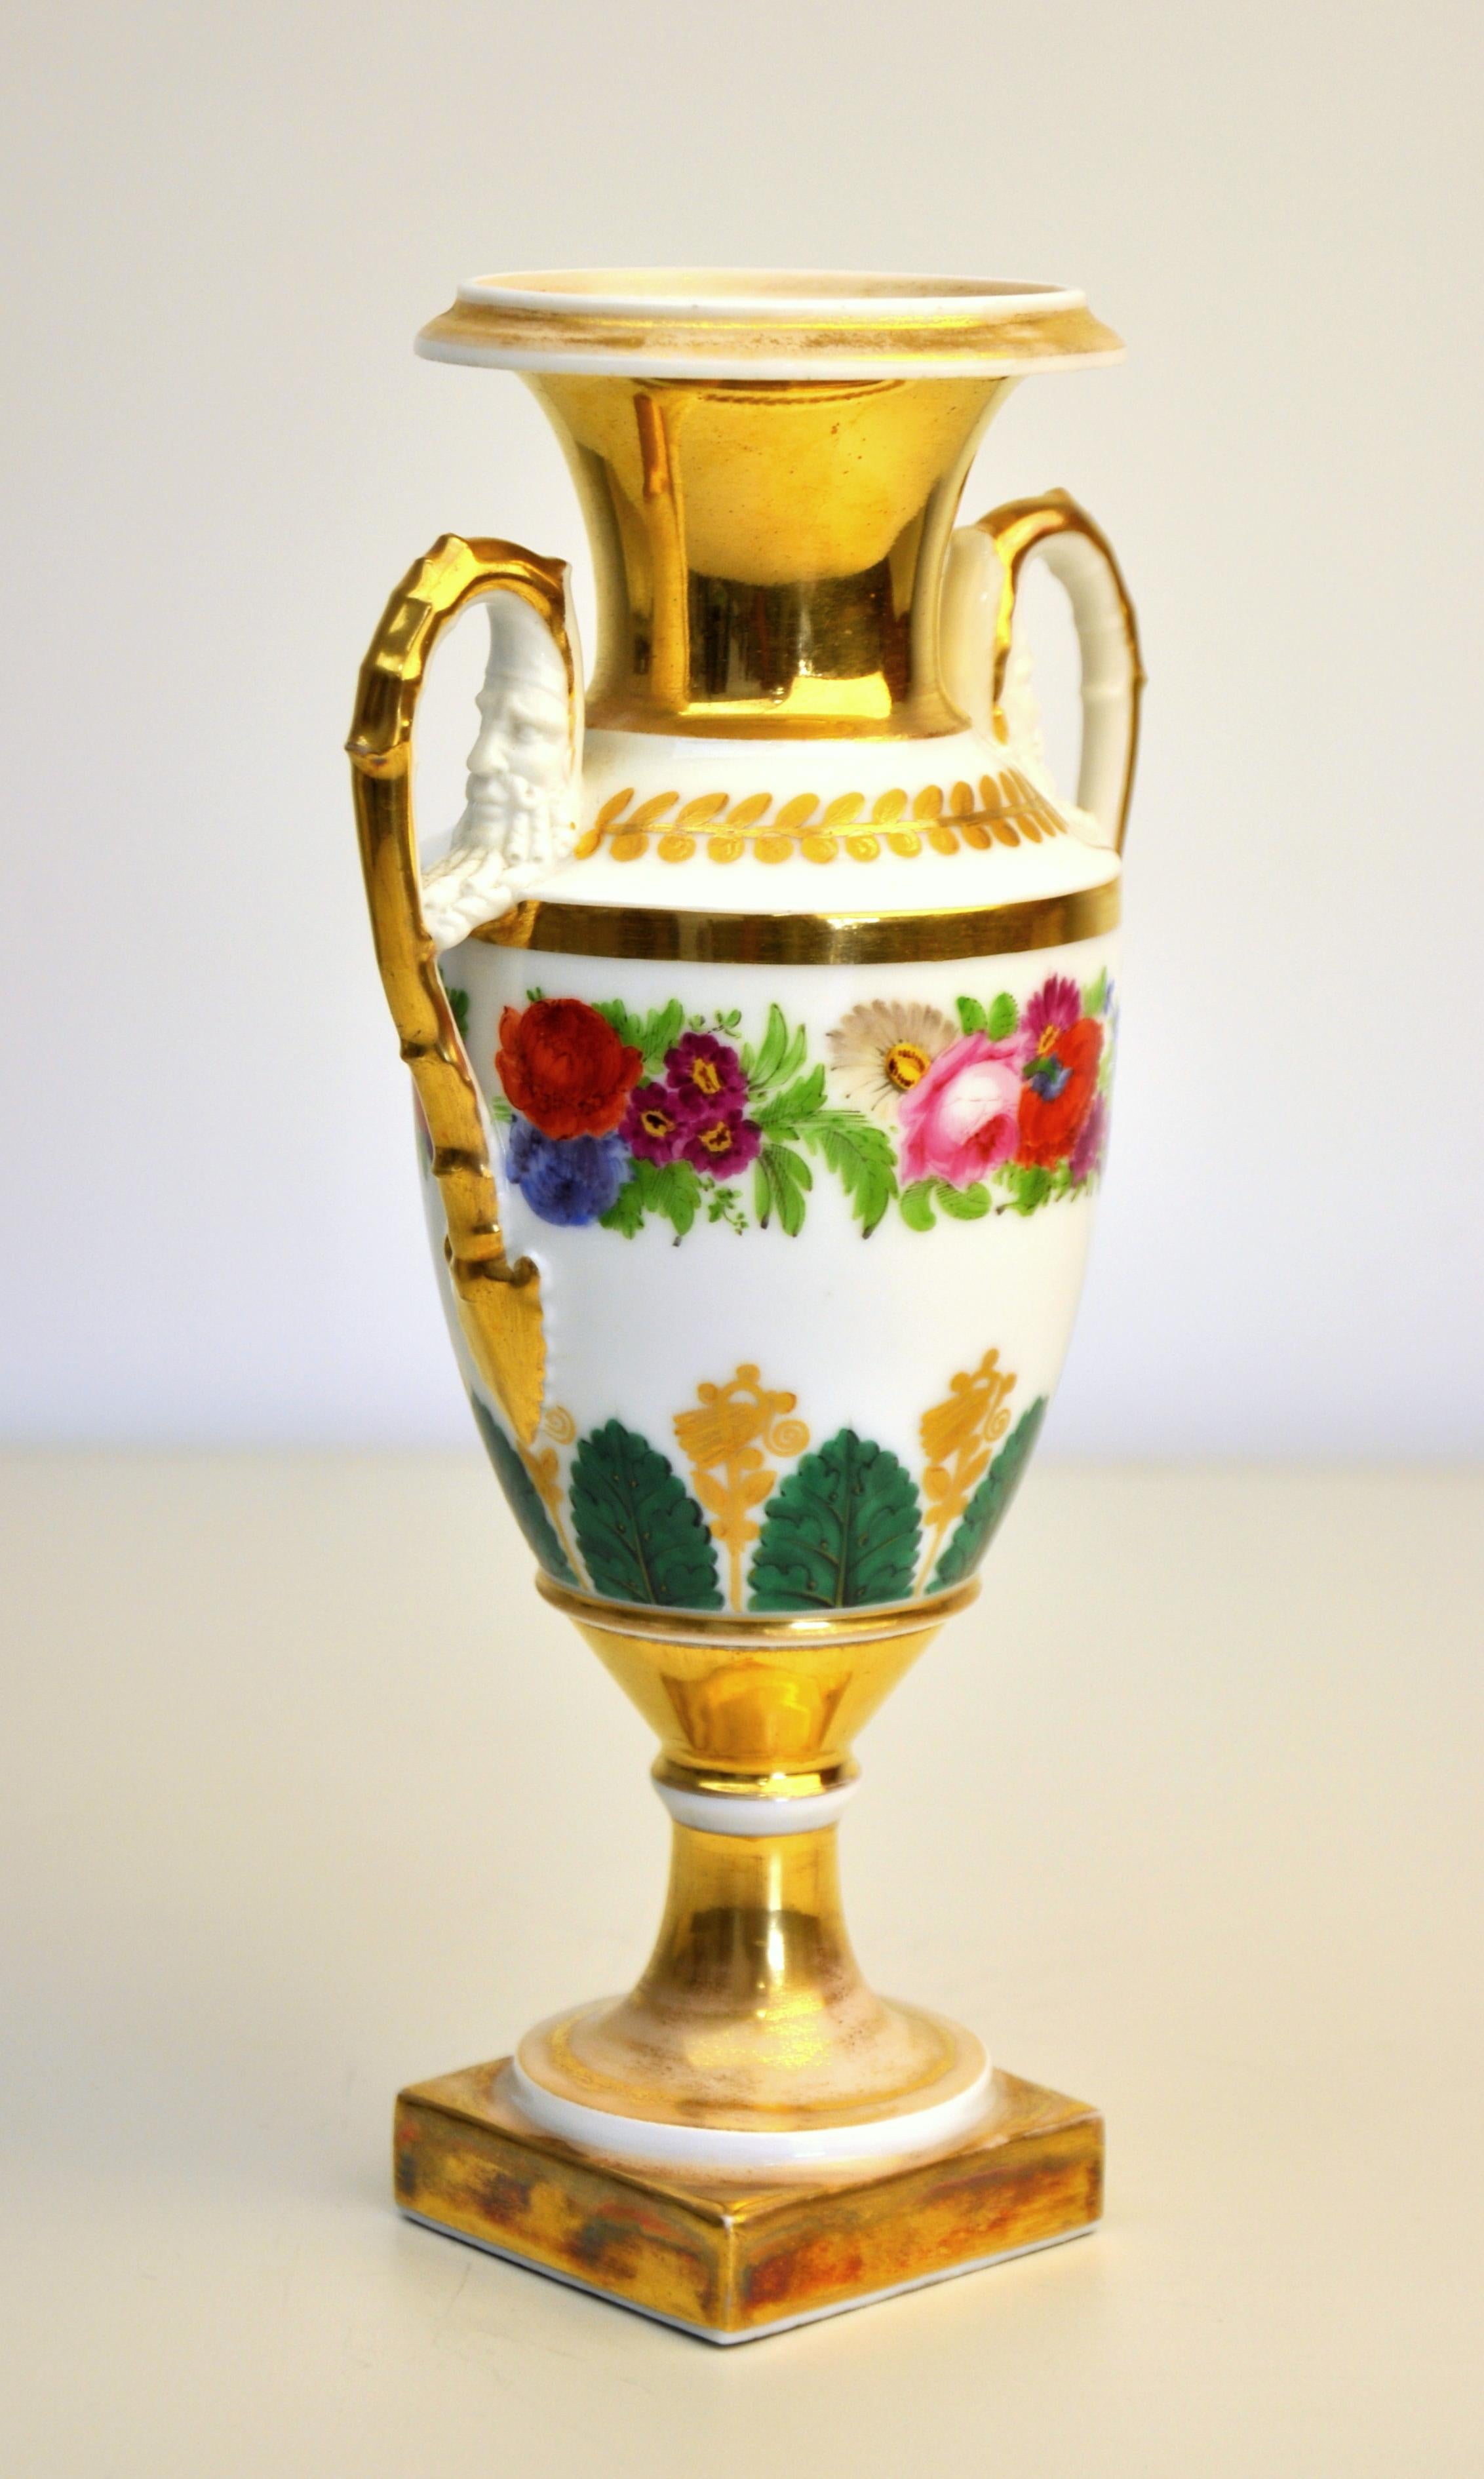 Gilt Old Paris Porcelain Neoclassical Vase, Early 19th Century